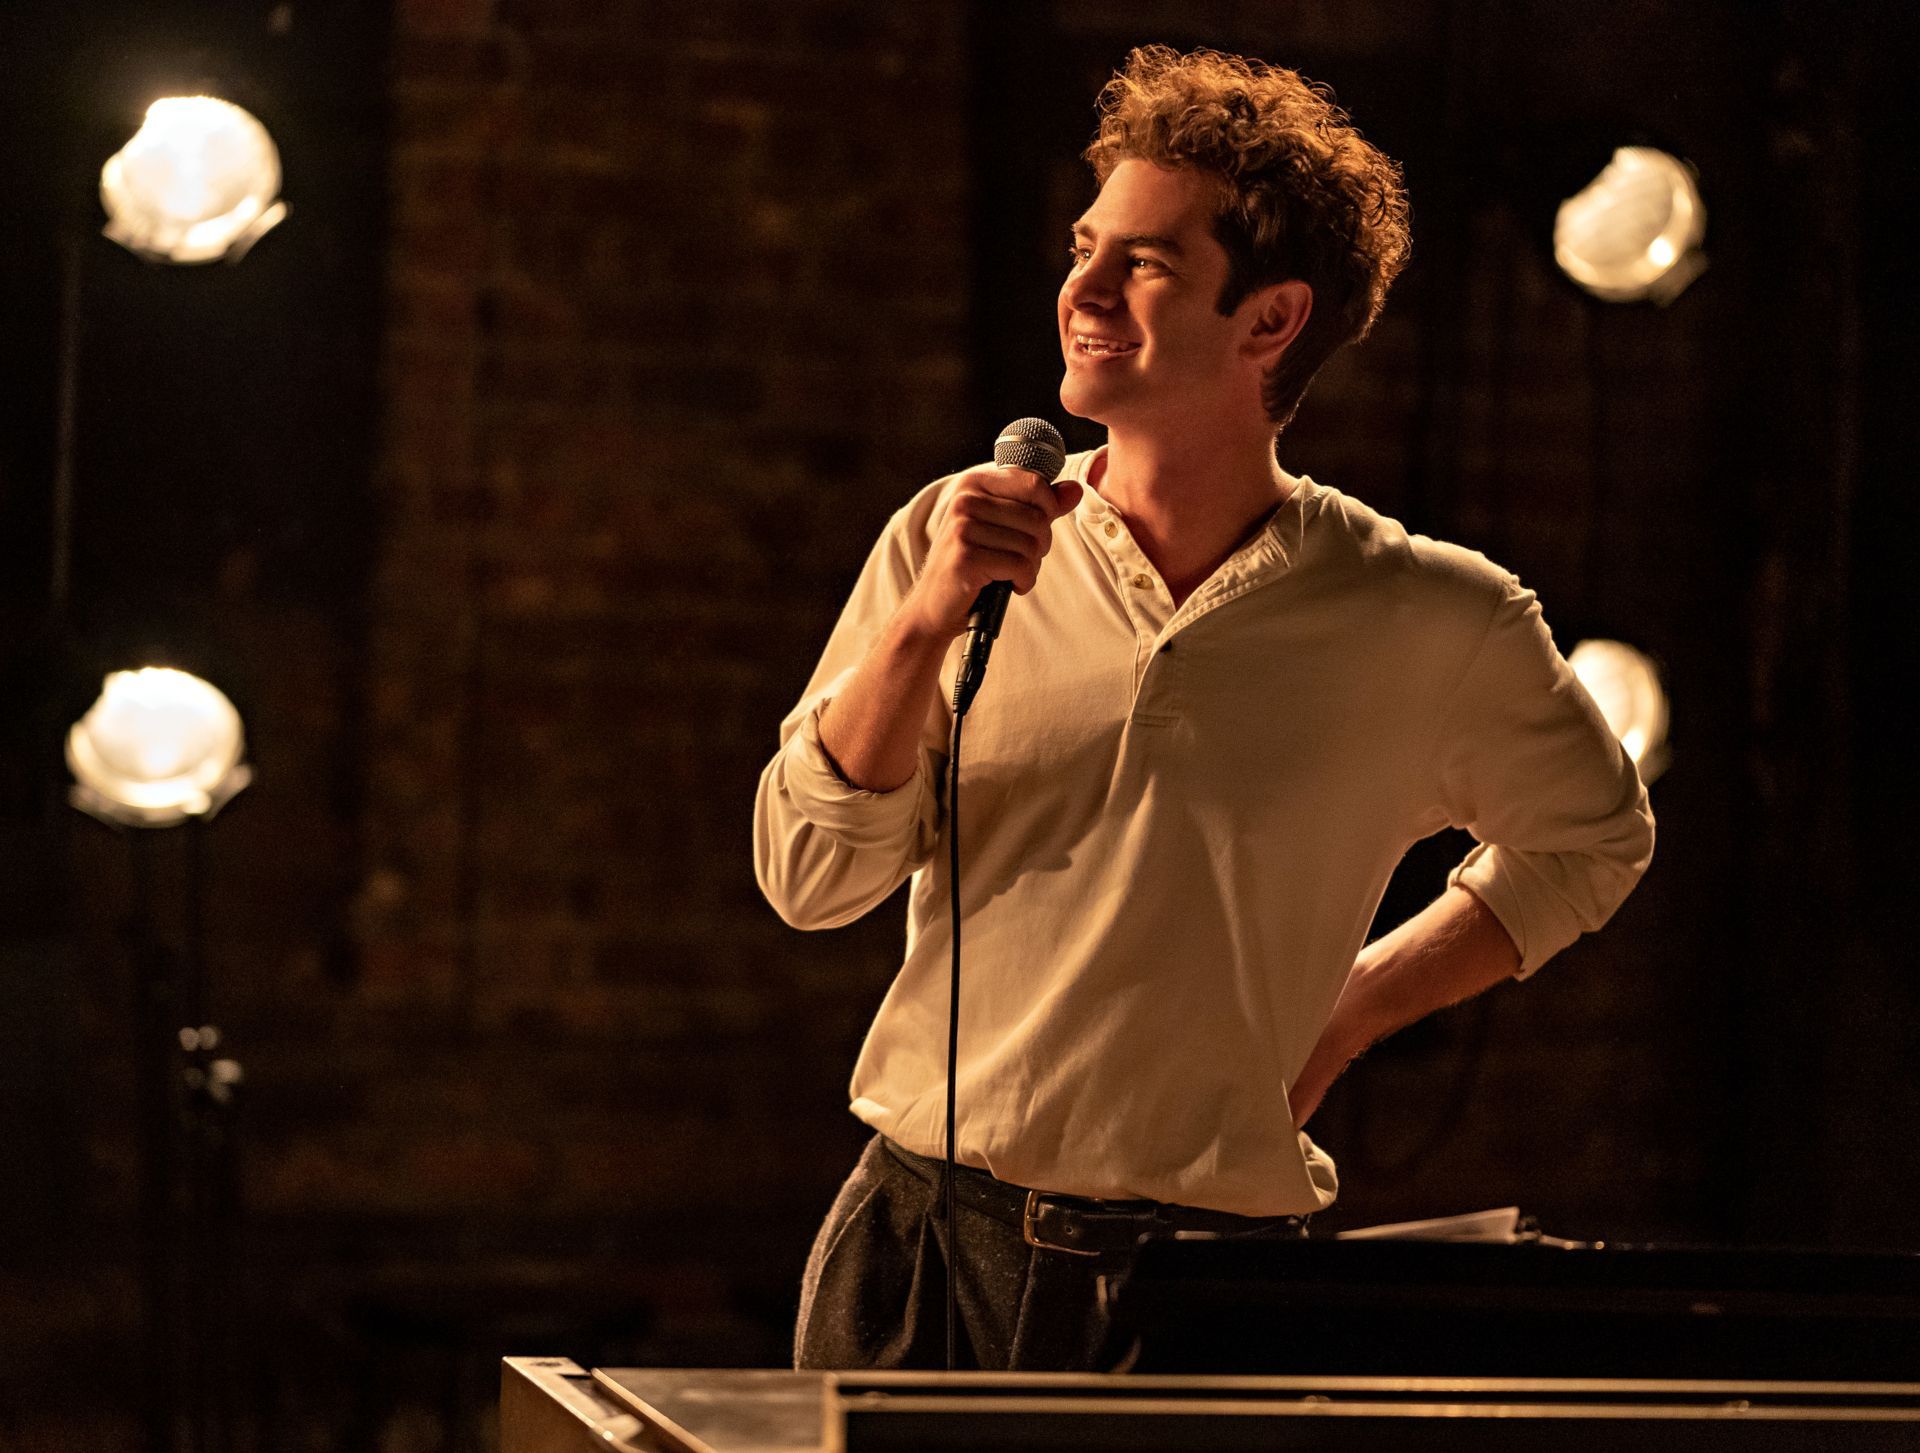 Andrew Garfield in a white shirt, holding a microphone and smiling. - Andrew Garfield